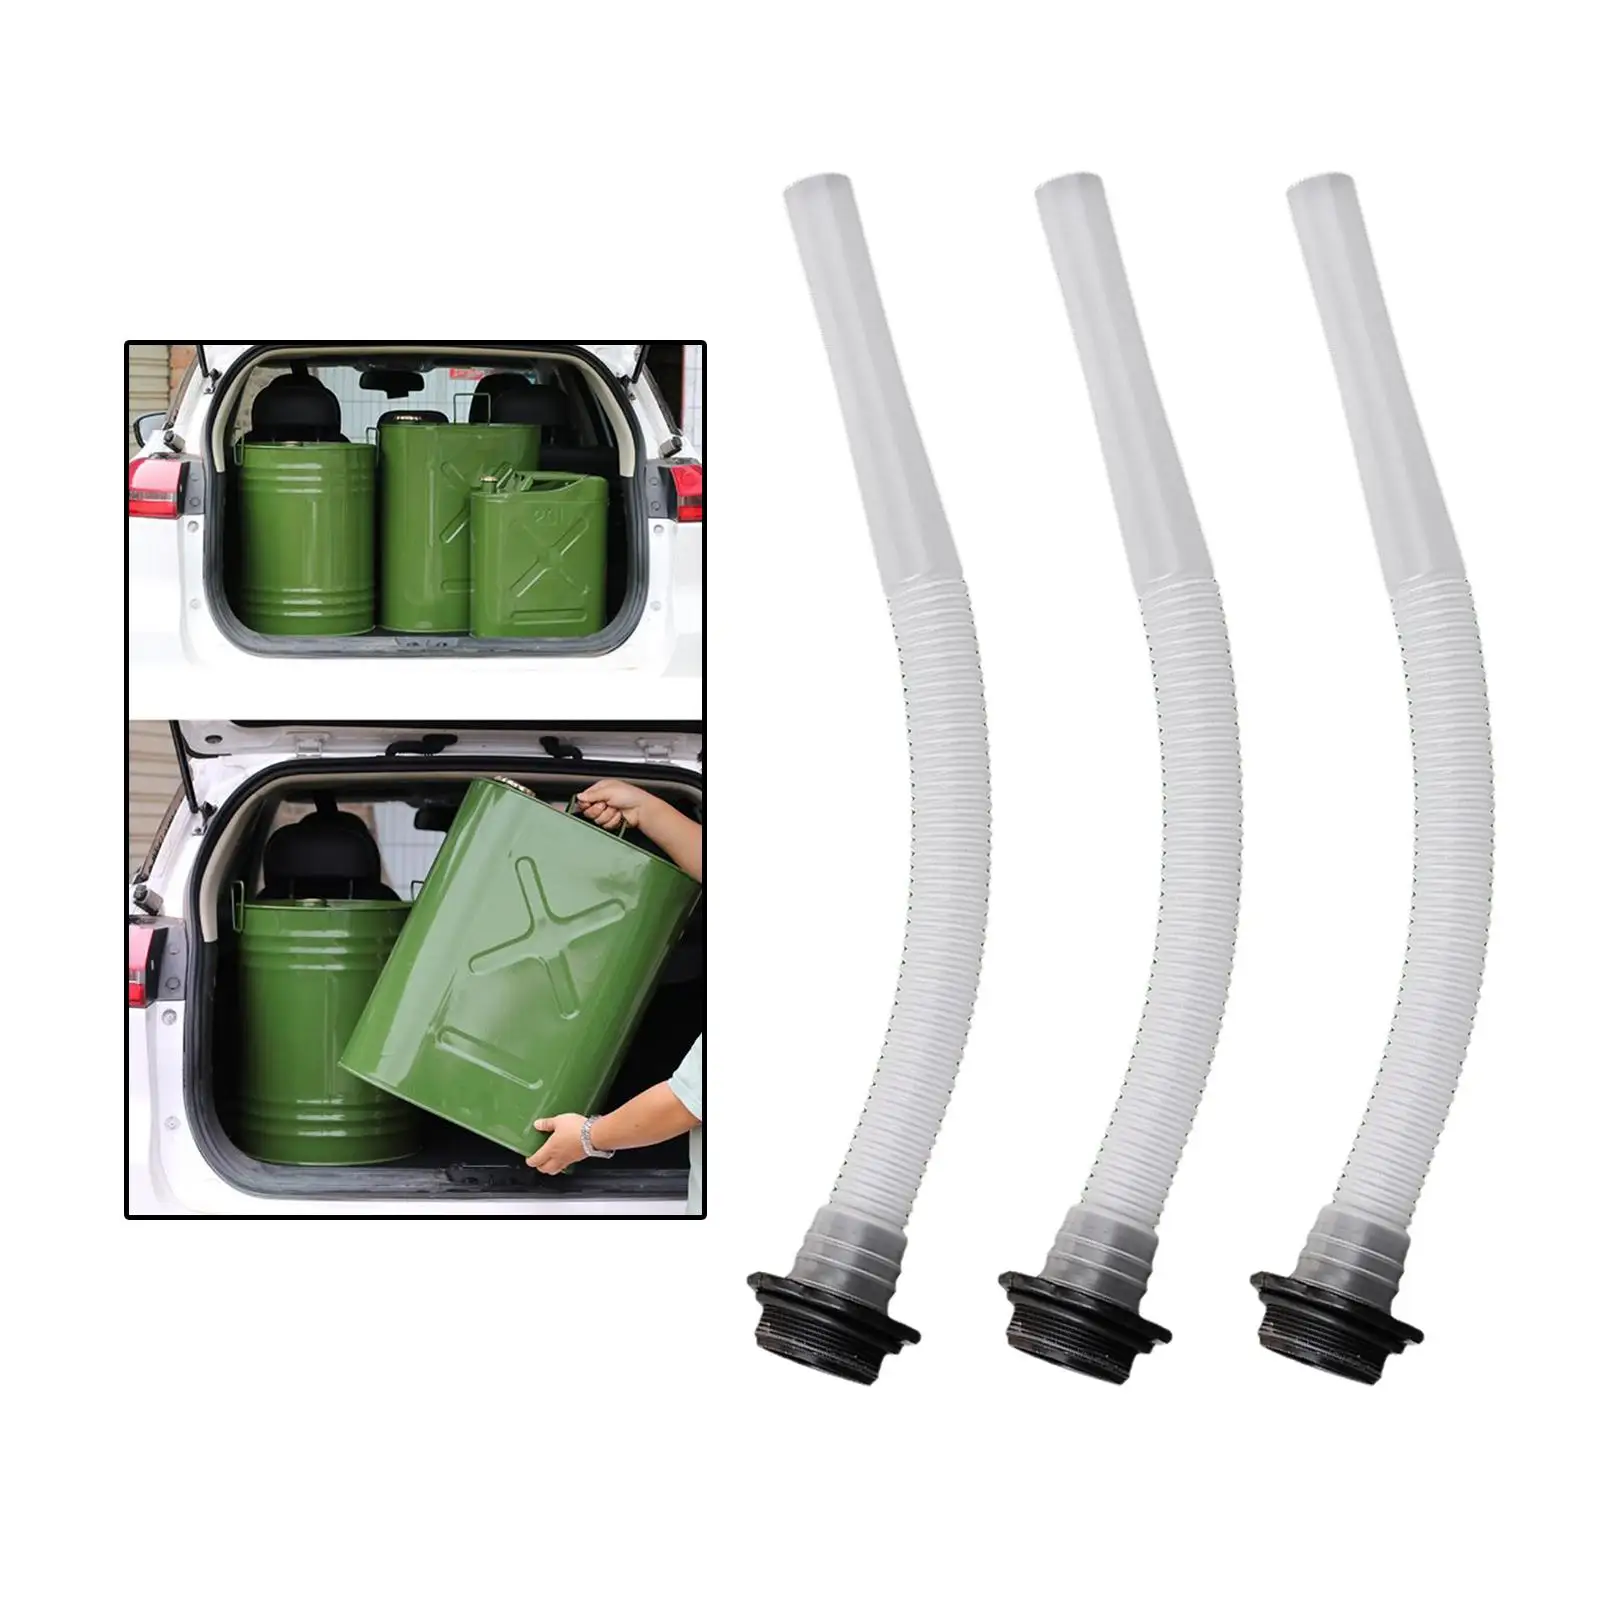 3Pcs Durable Fuel Tanks Nozzle Motorcycle Parts Leakproof Sealing Vehicle Equipment Petrol Can Flexible Tube Oil Container Pipe